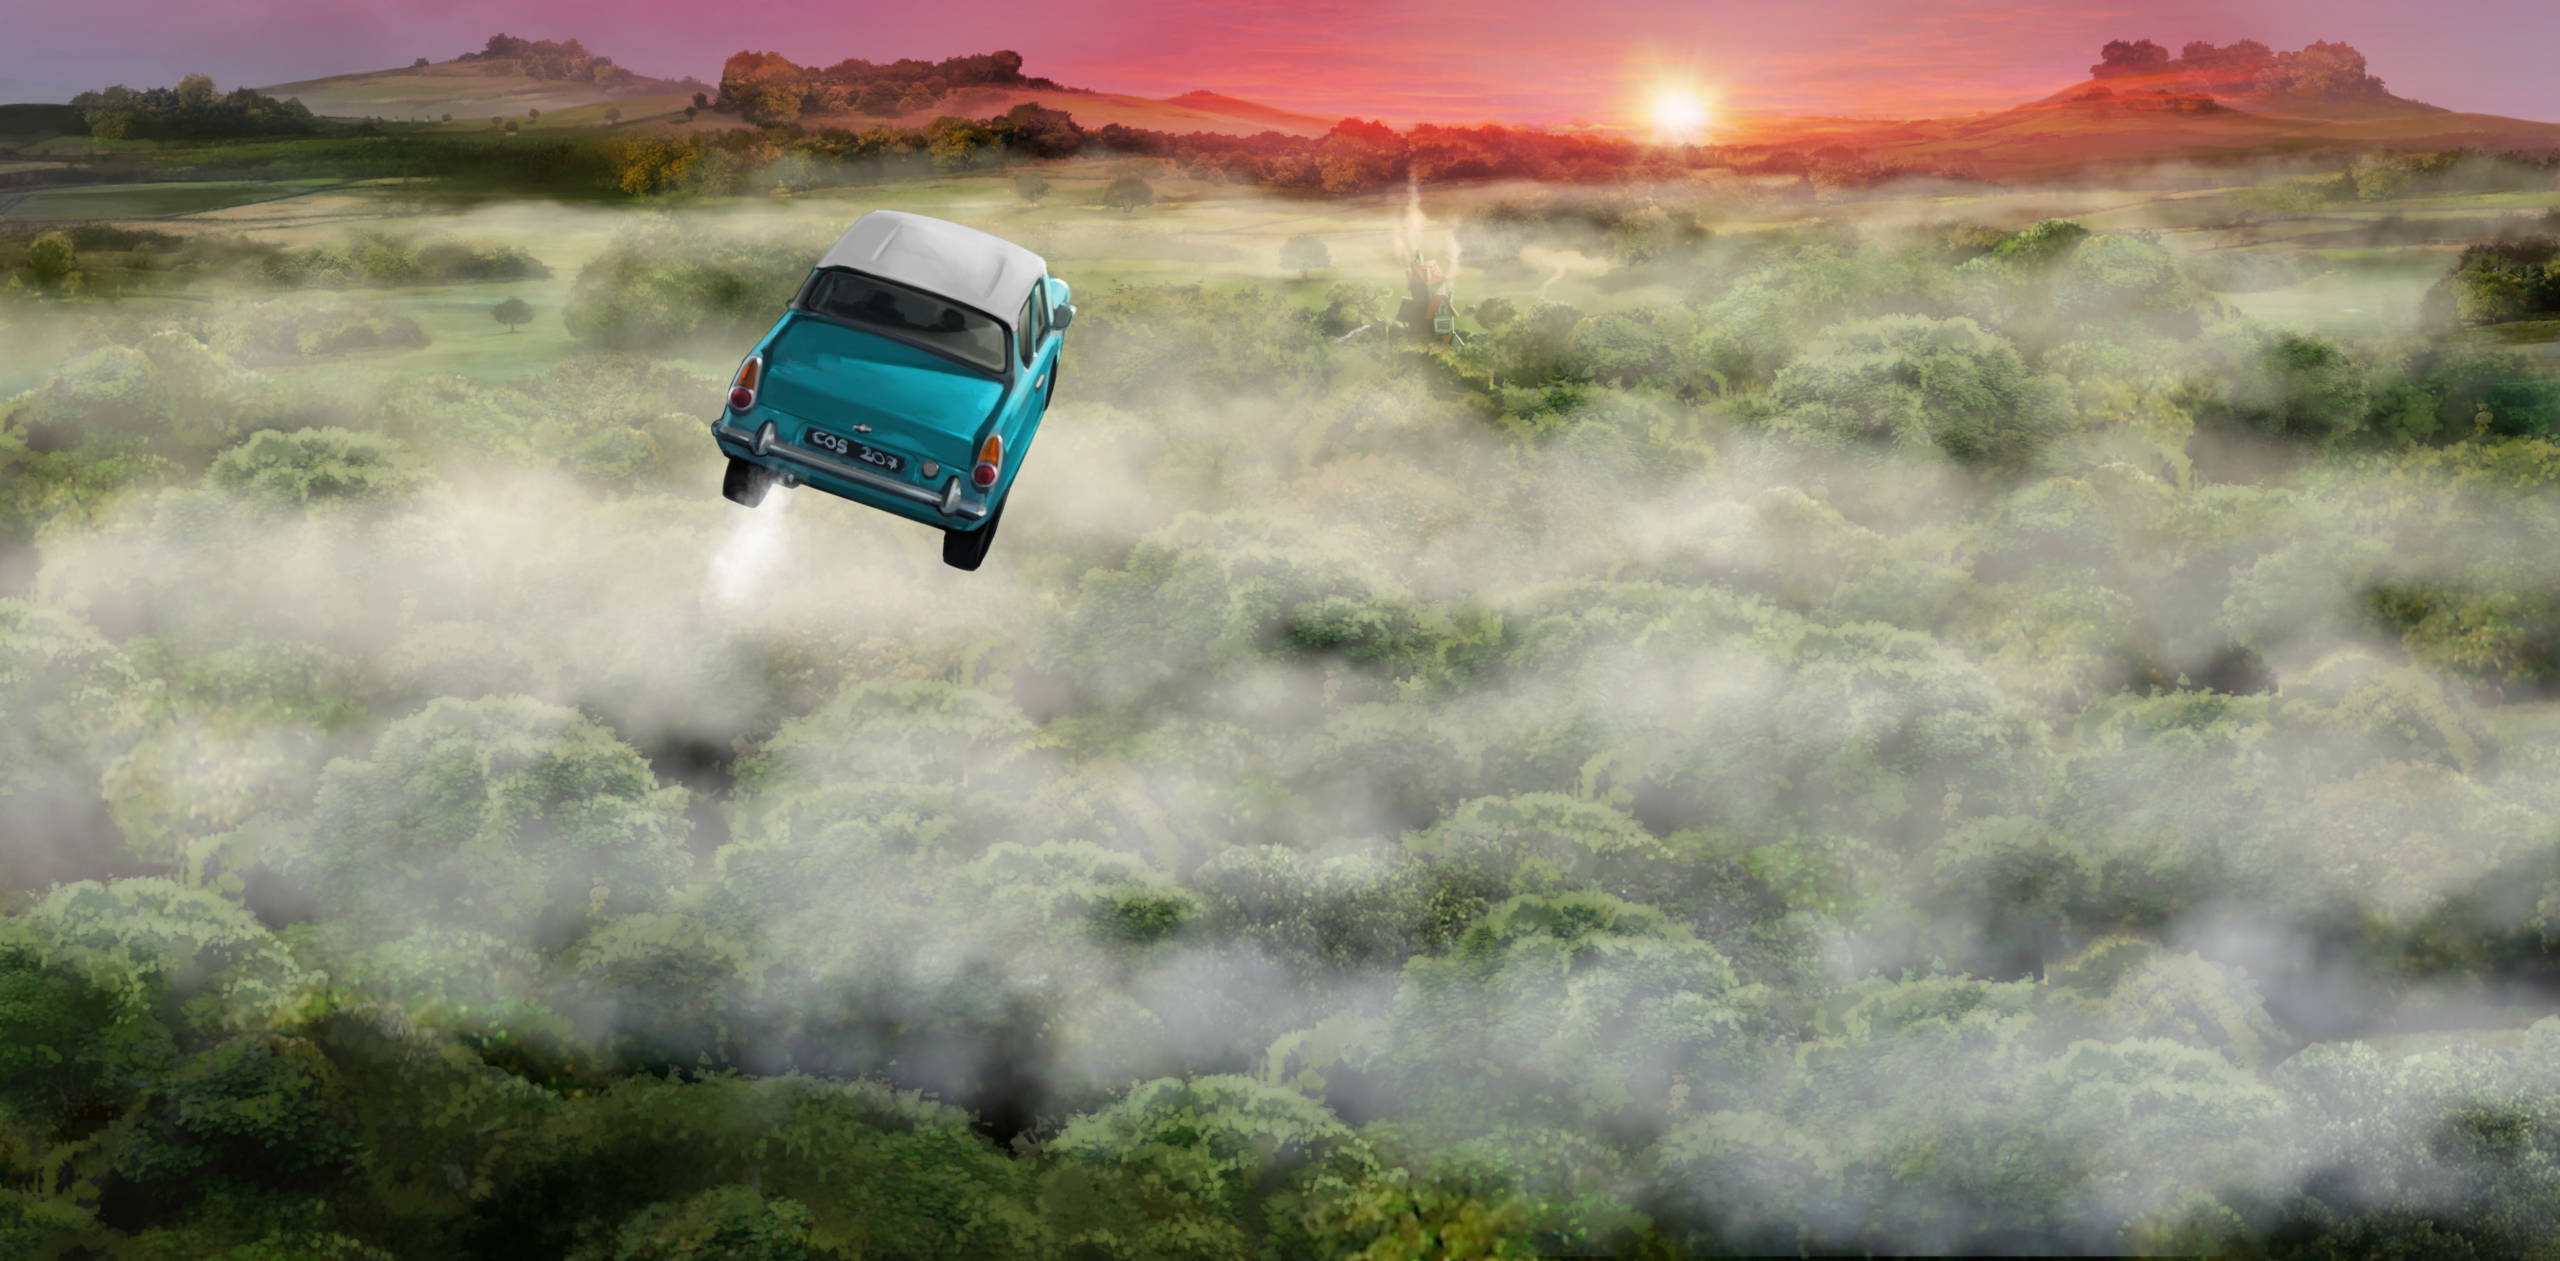 The Ford Anglia flying over the clouds 